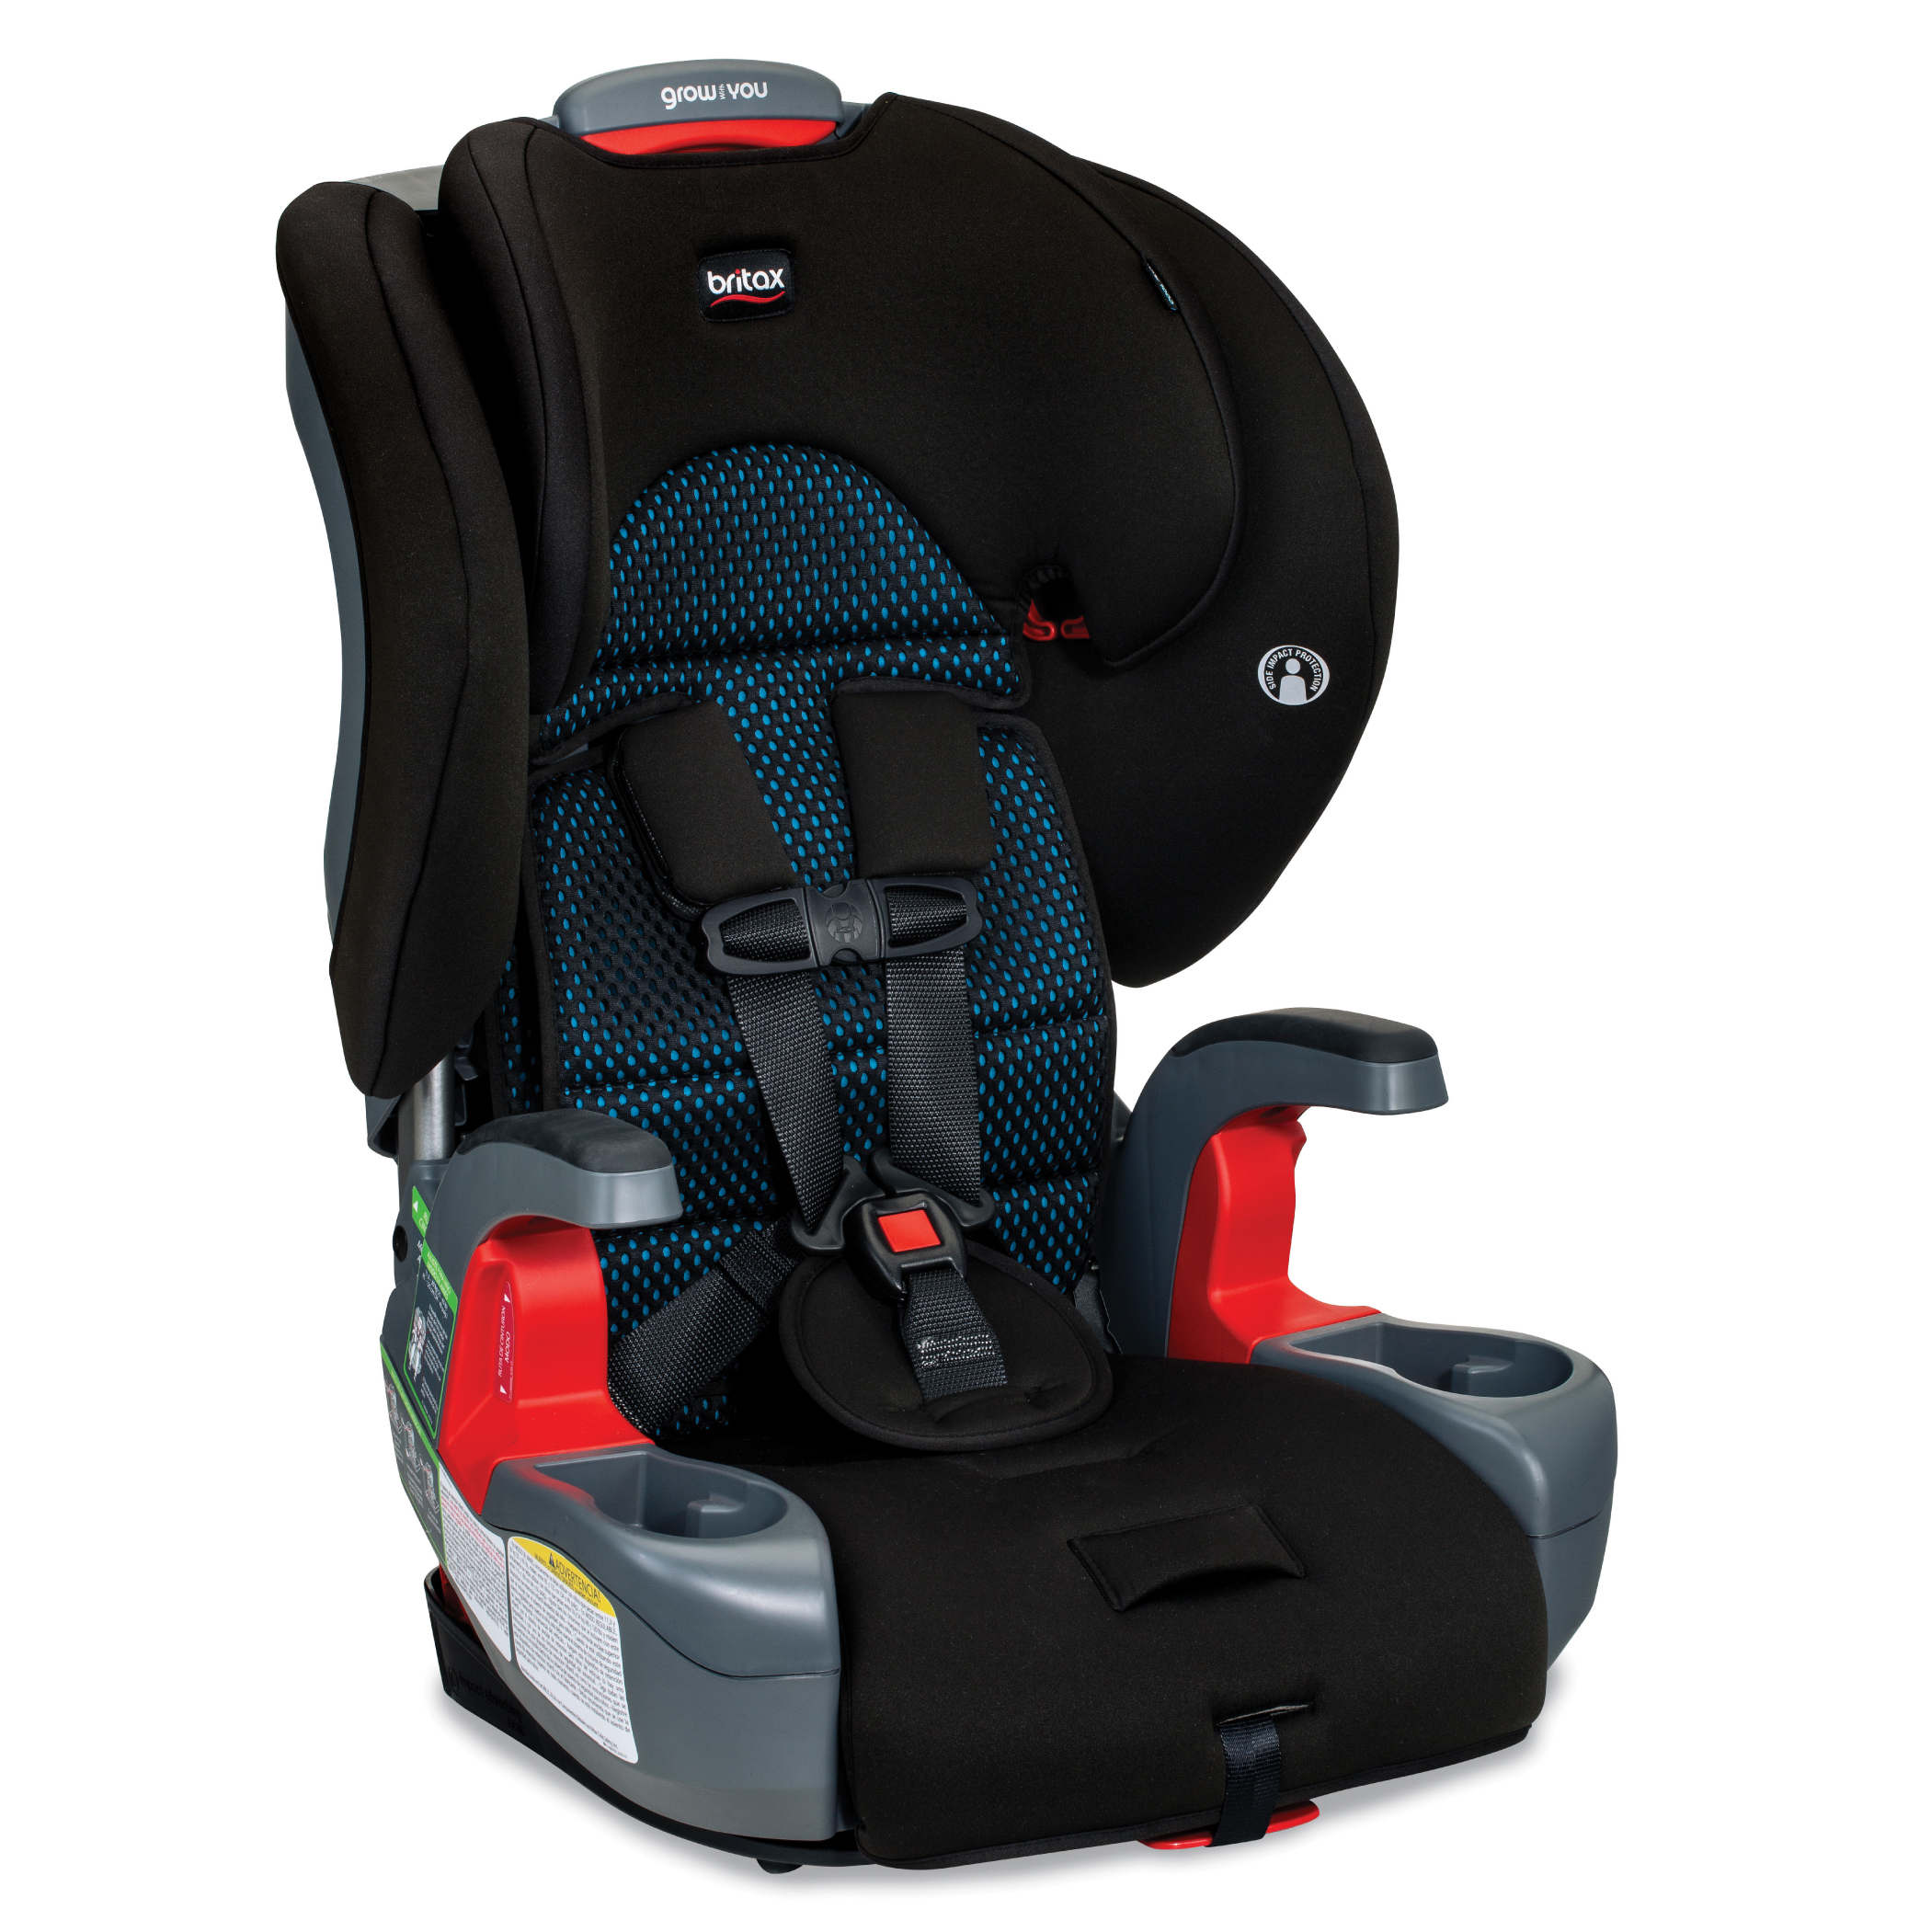 Britax Grow With You High-back Booster Car Seat, Black - image 1 of 13